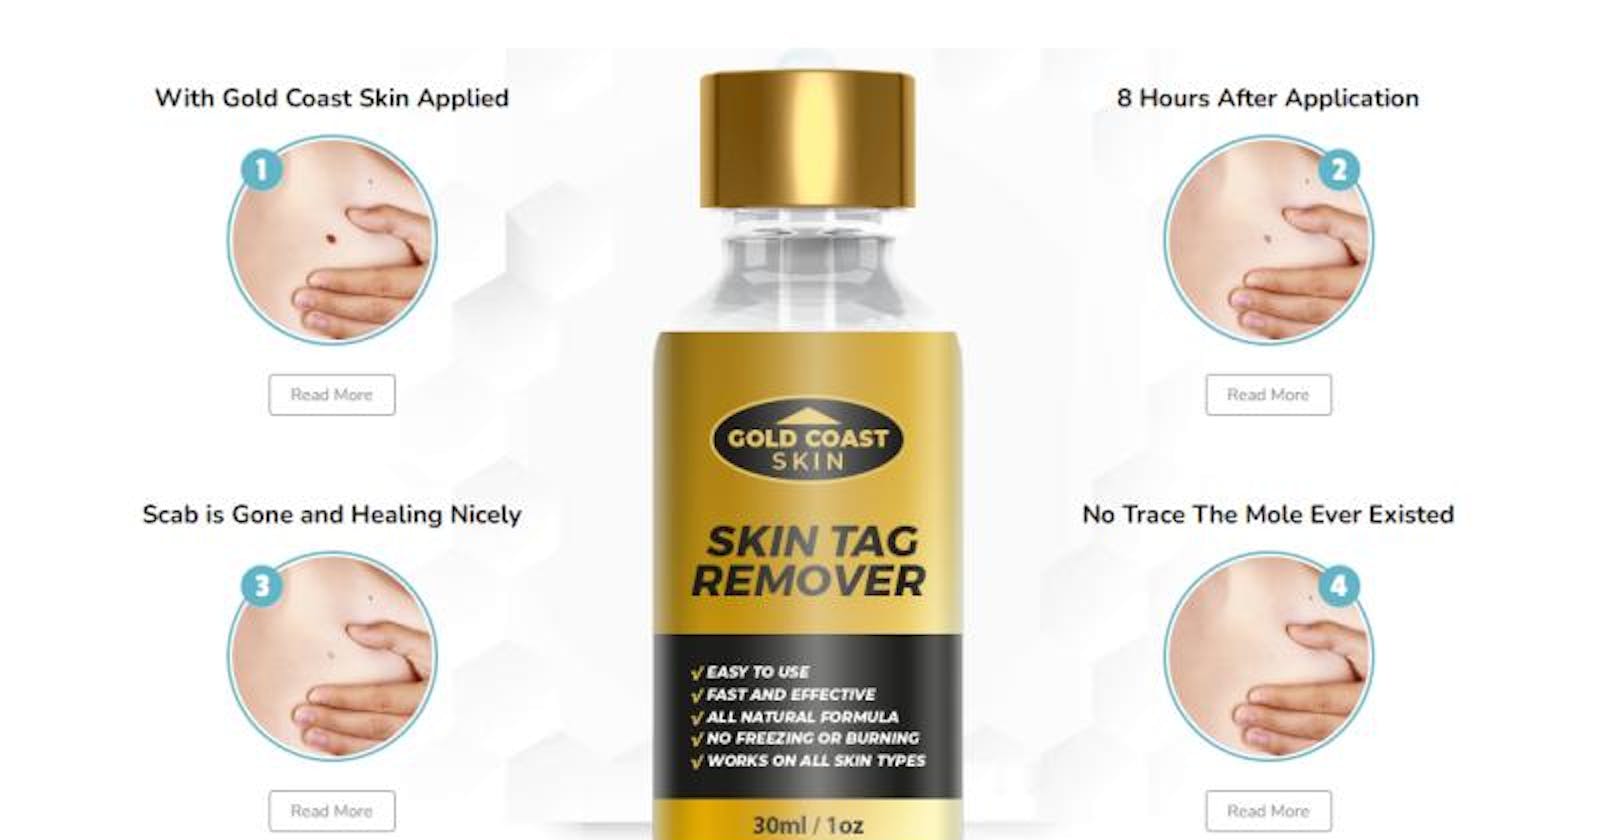 Gold Coast Skin Tag Remover Amazon : Ingredients  Advantage, Price & Where can I buy?